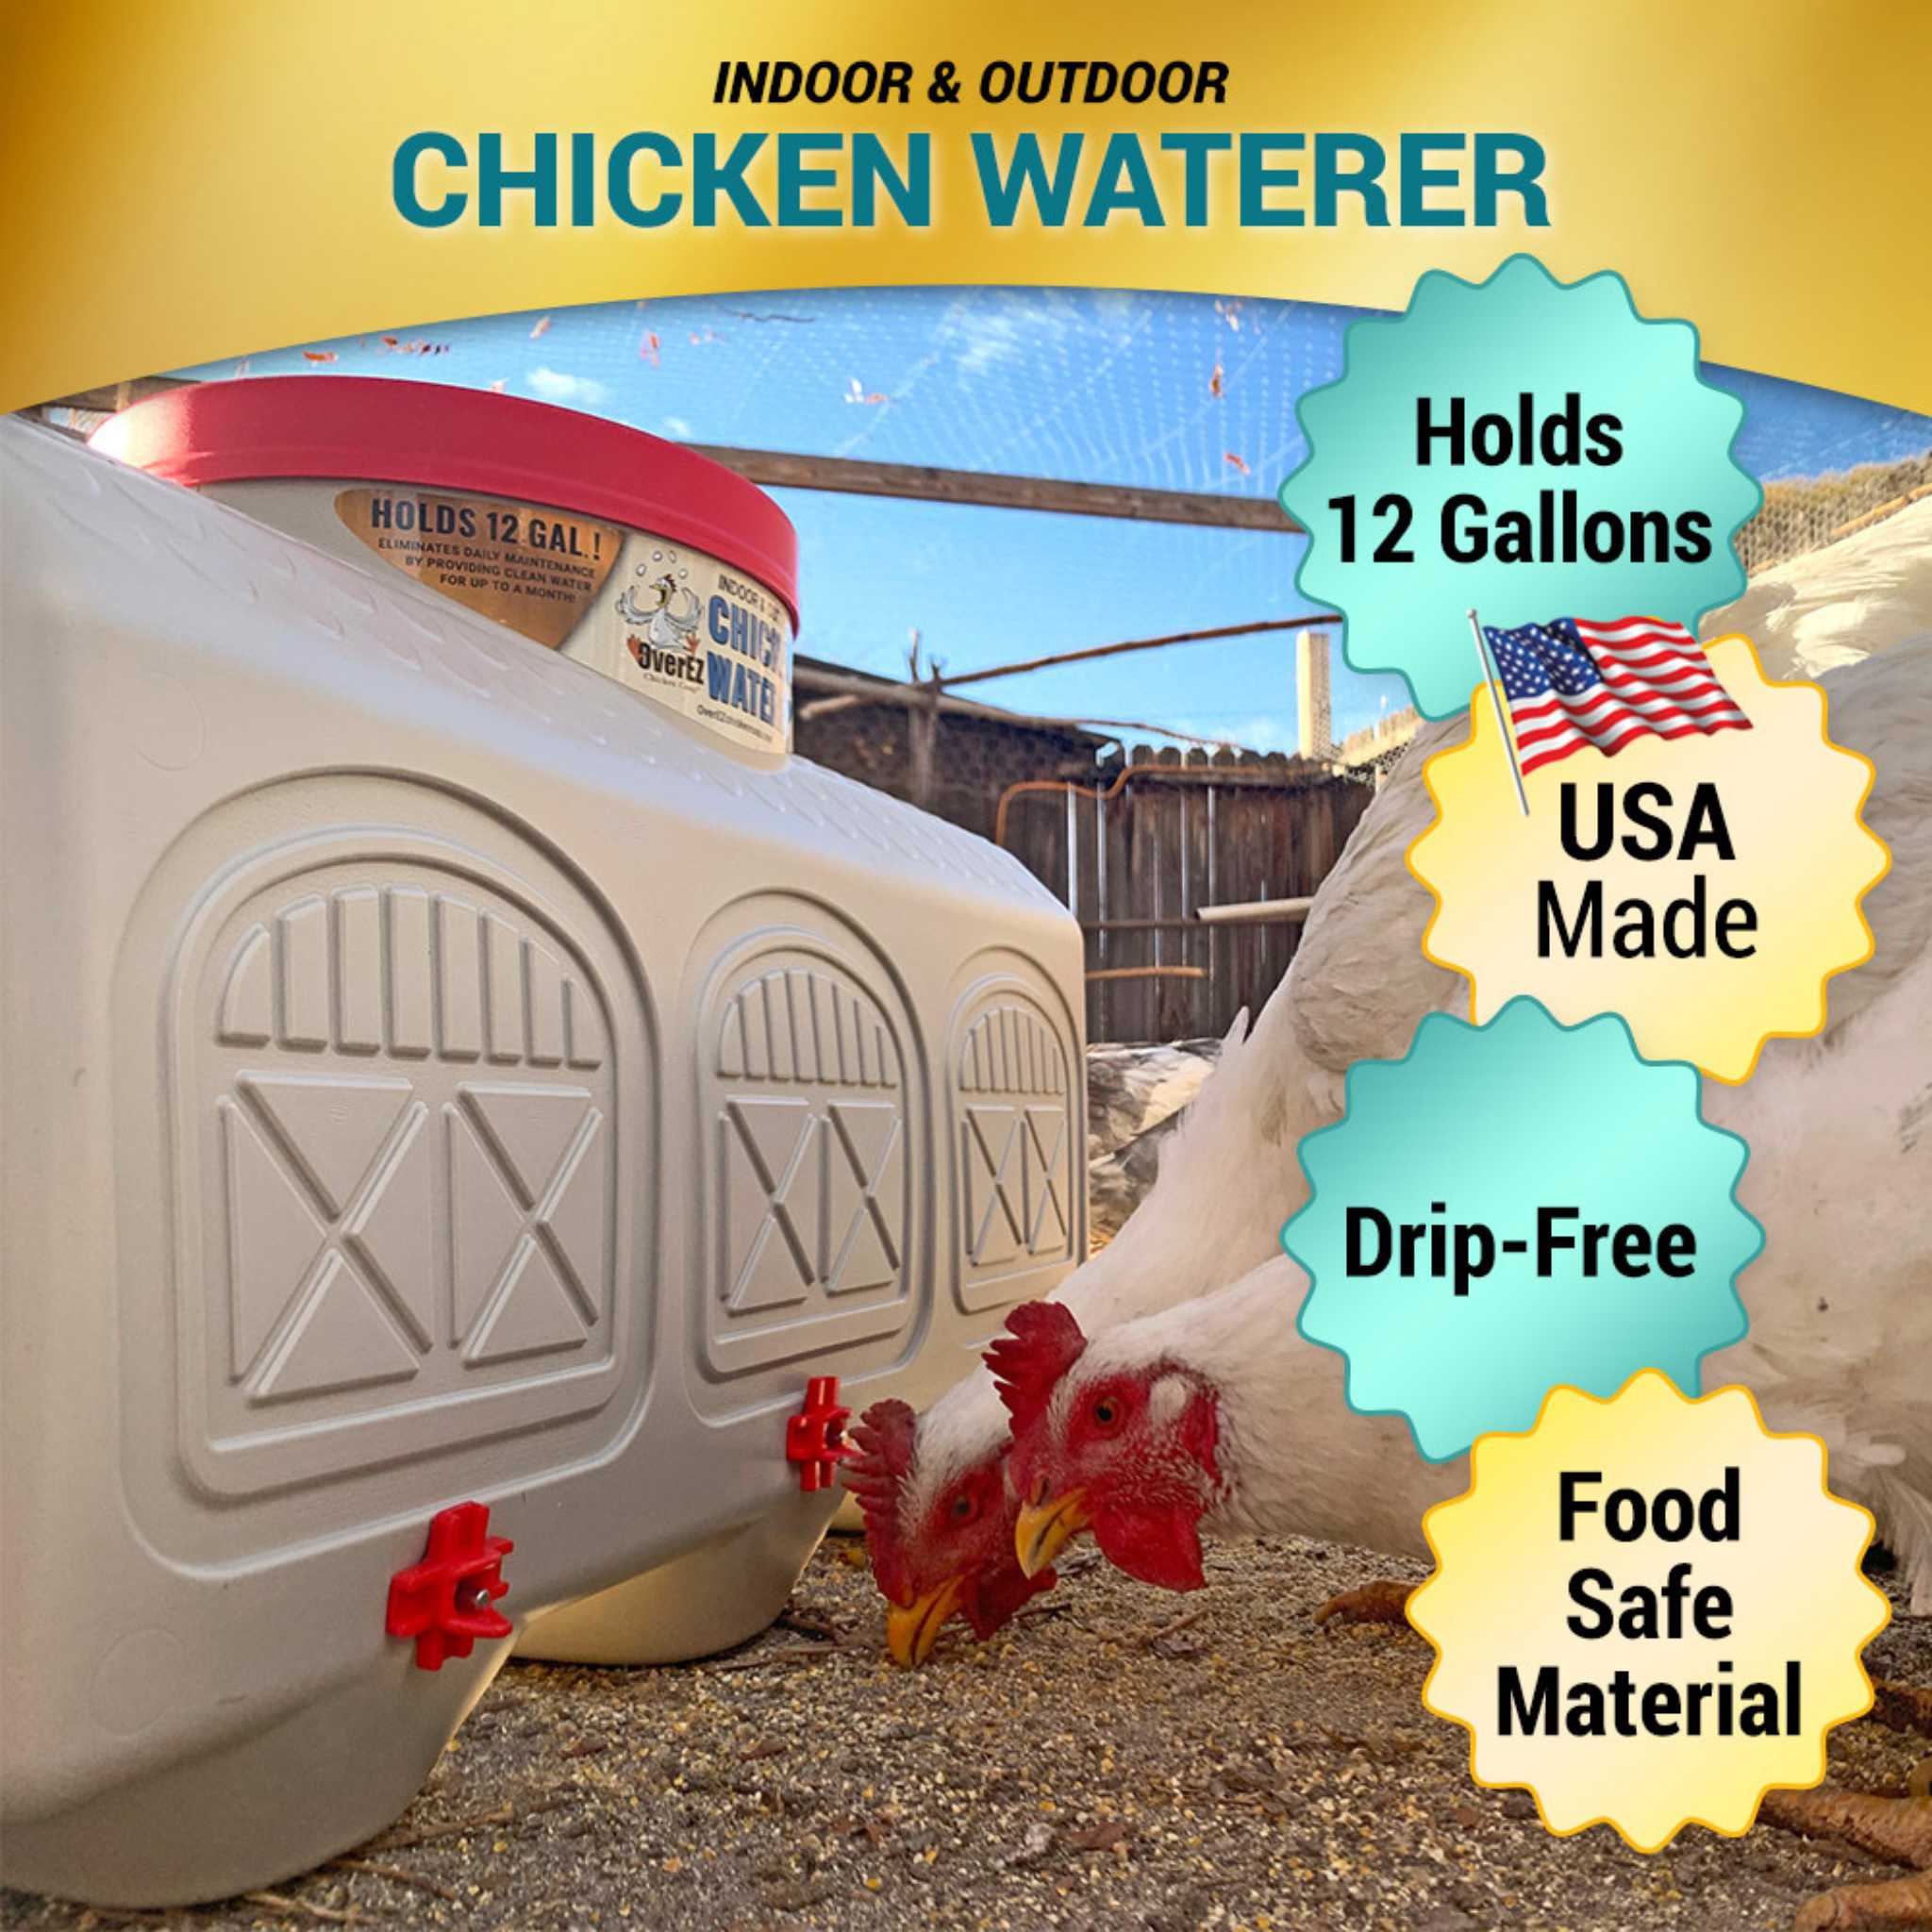 Hatching Time OverEZ. Infographic shows 12 gallon capacity, made in the USA, drip-free design and is made with food grade material.